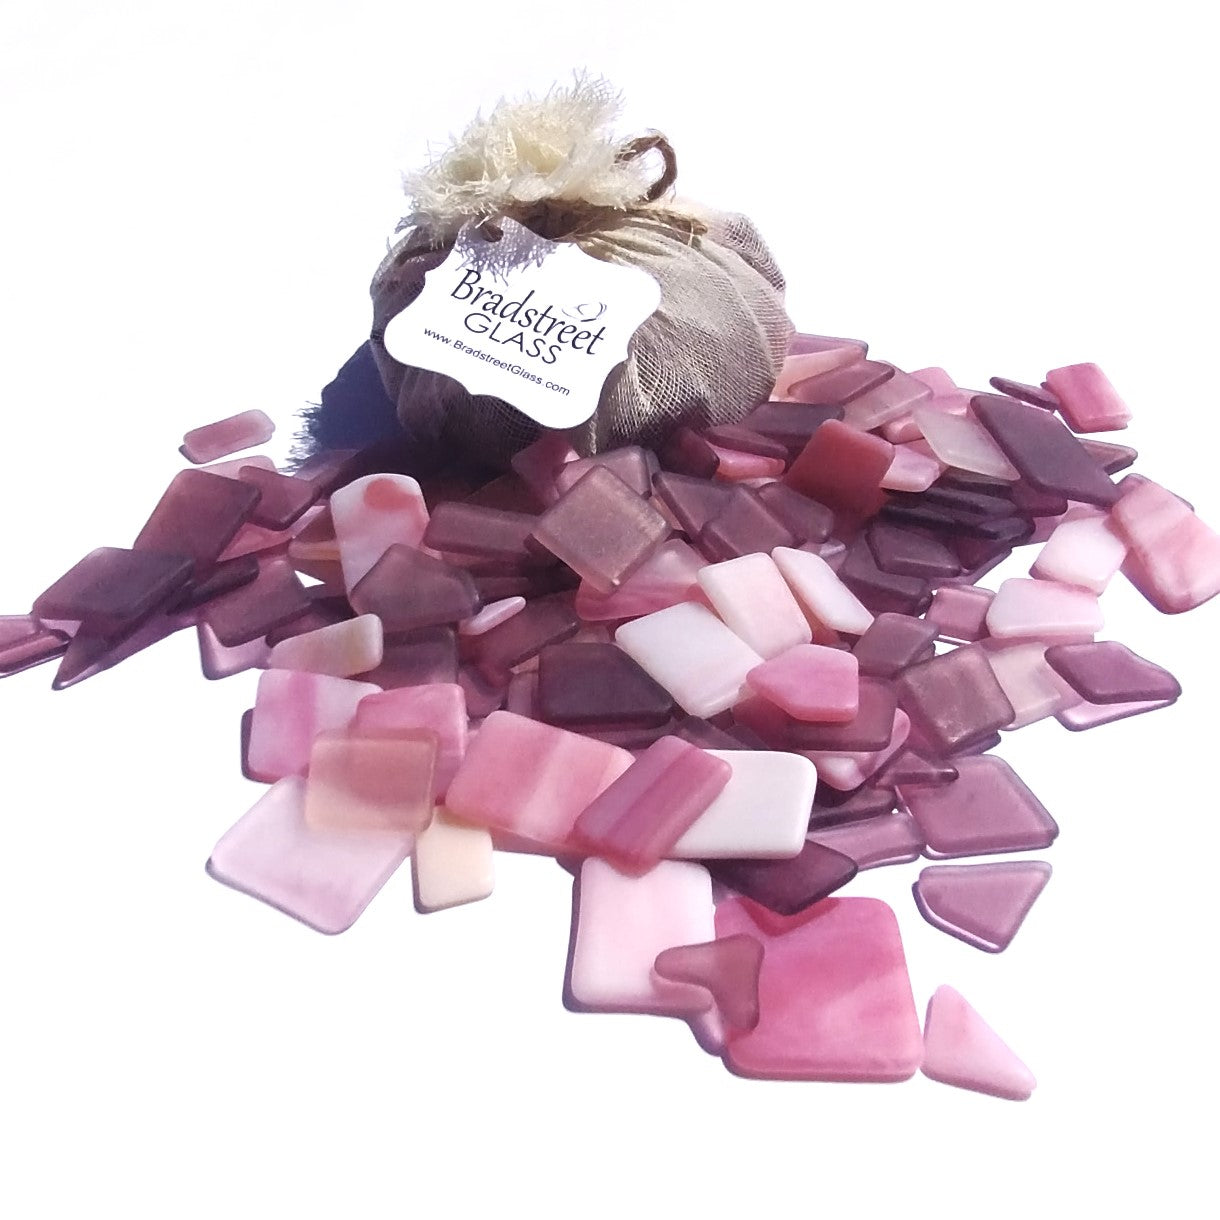 Bradstreet Glass Pink Tumbled Stained Glass 1/2 pound "Sea Glass" in Shades of Pink, Peach